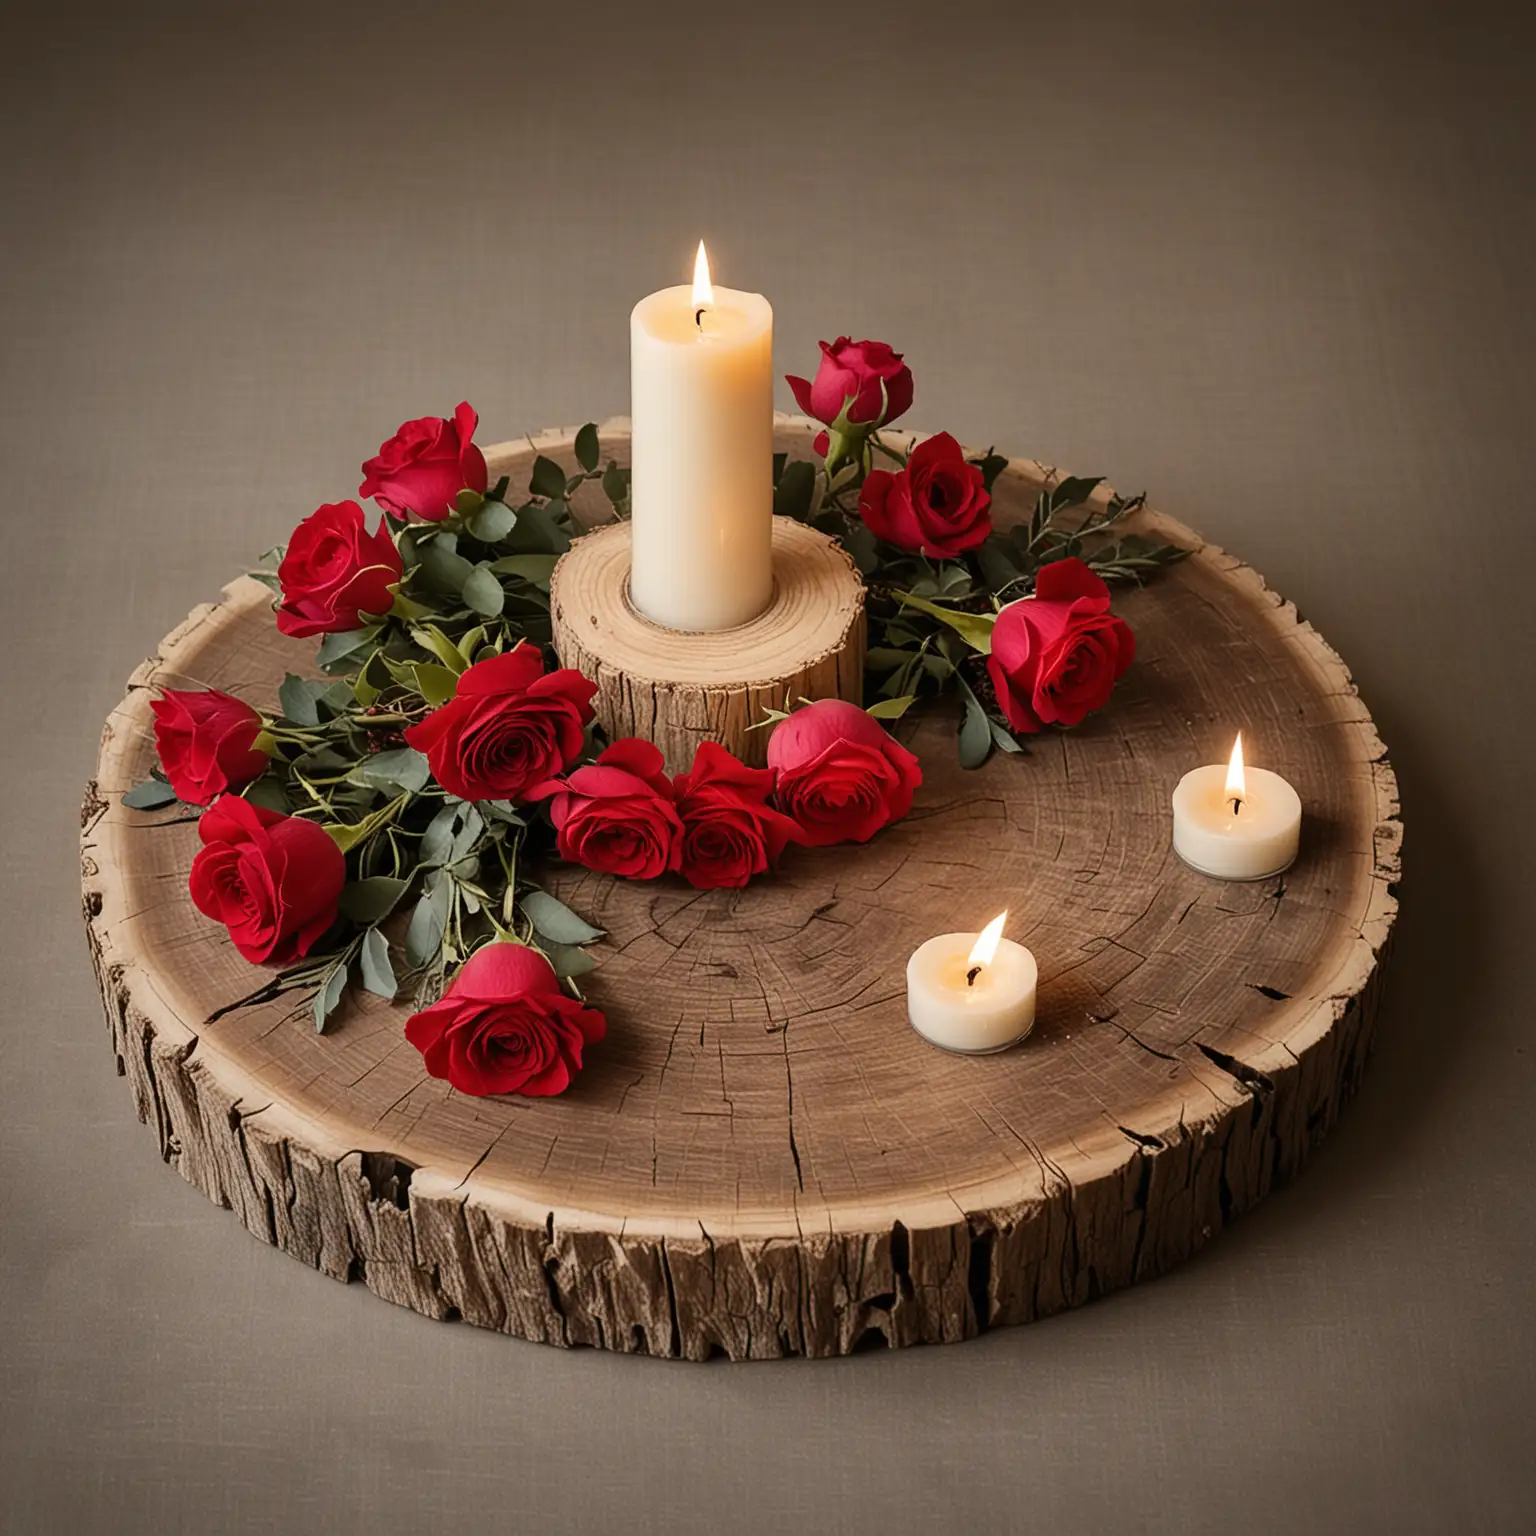 a small round wood slab that is rustic and worn with a single pillar candle in the center that is surrounded by red roses laid down across the arrangement